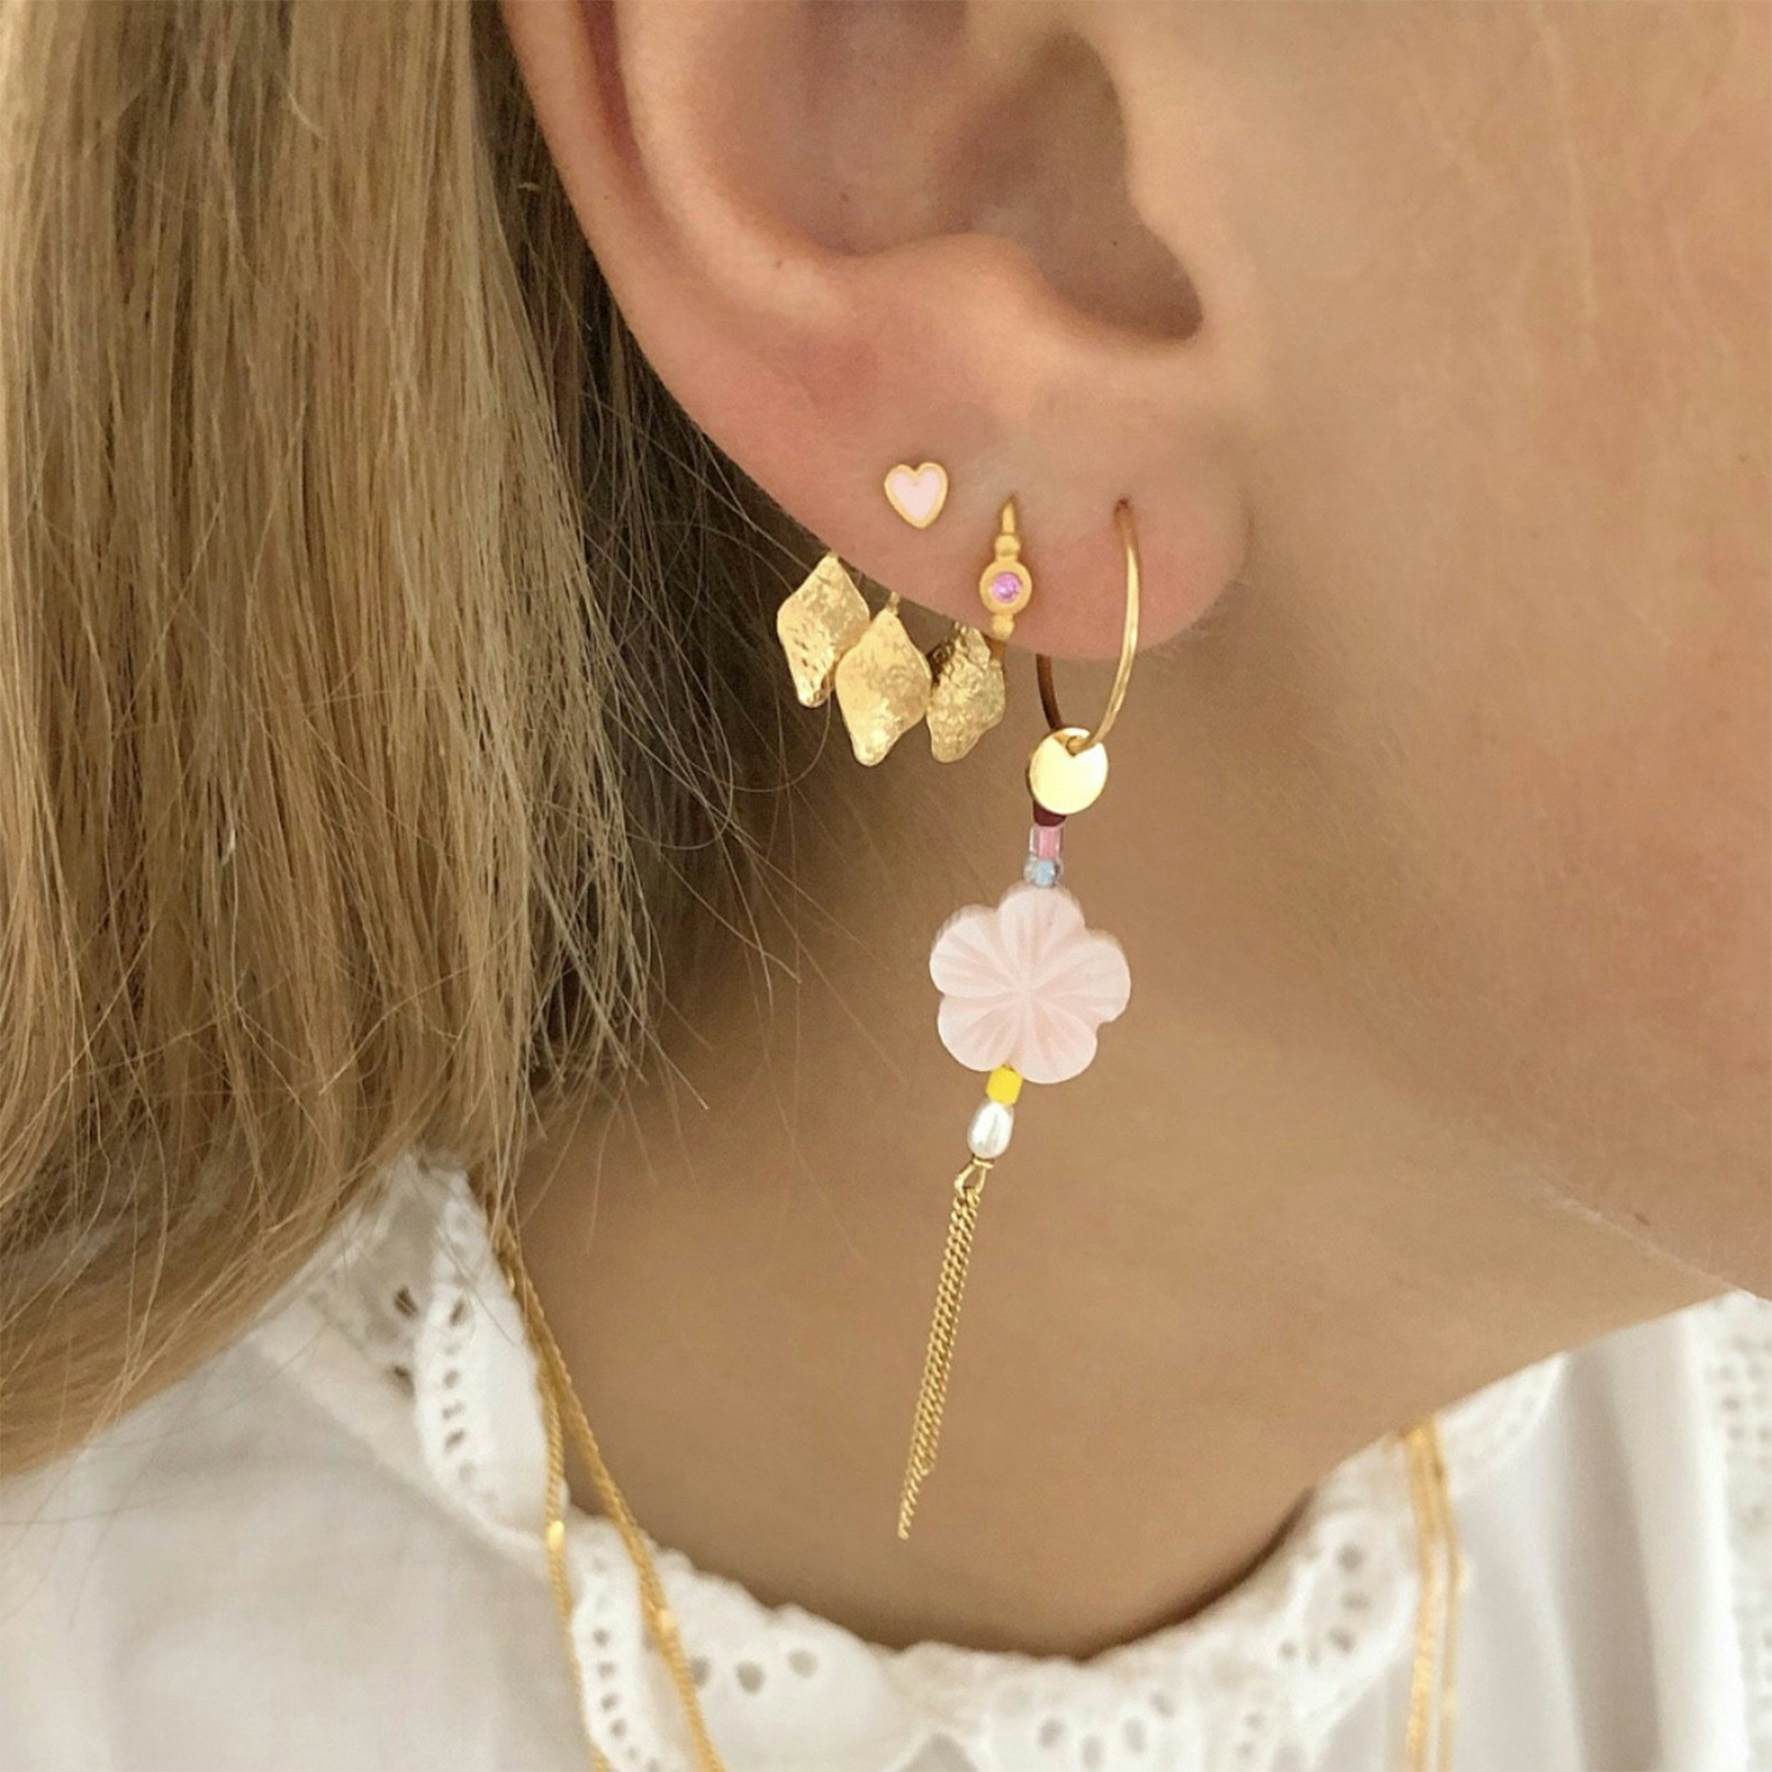 Dancing Three Ile De L'Amour Behind Ear Earring from STINE A Jewelry in Goldplated-Silver Sterling 925